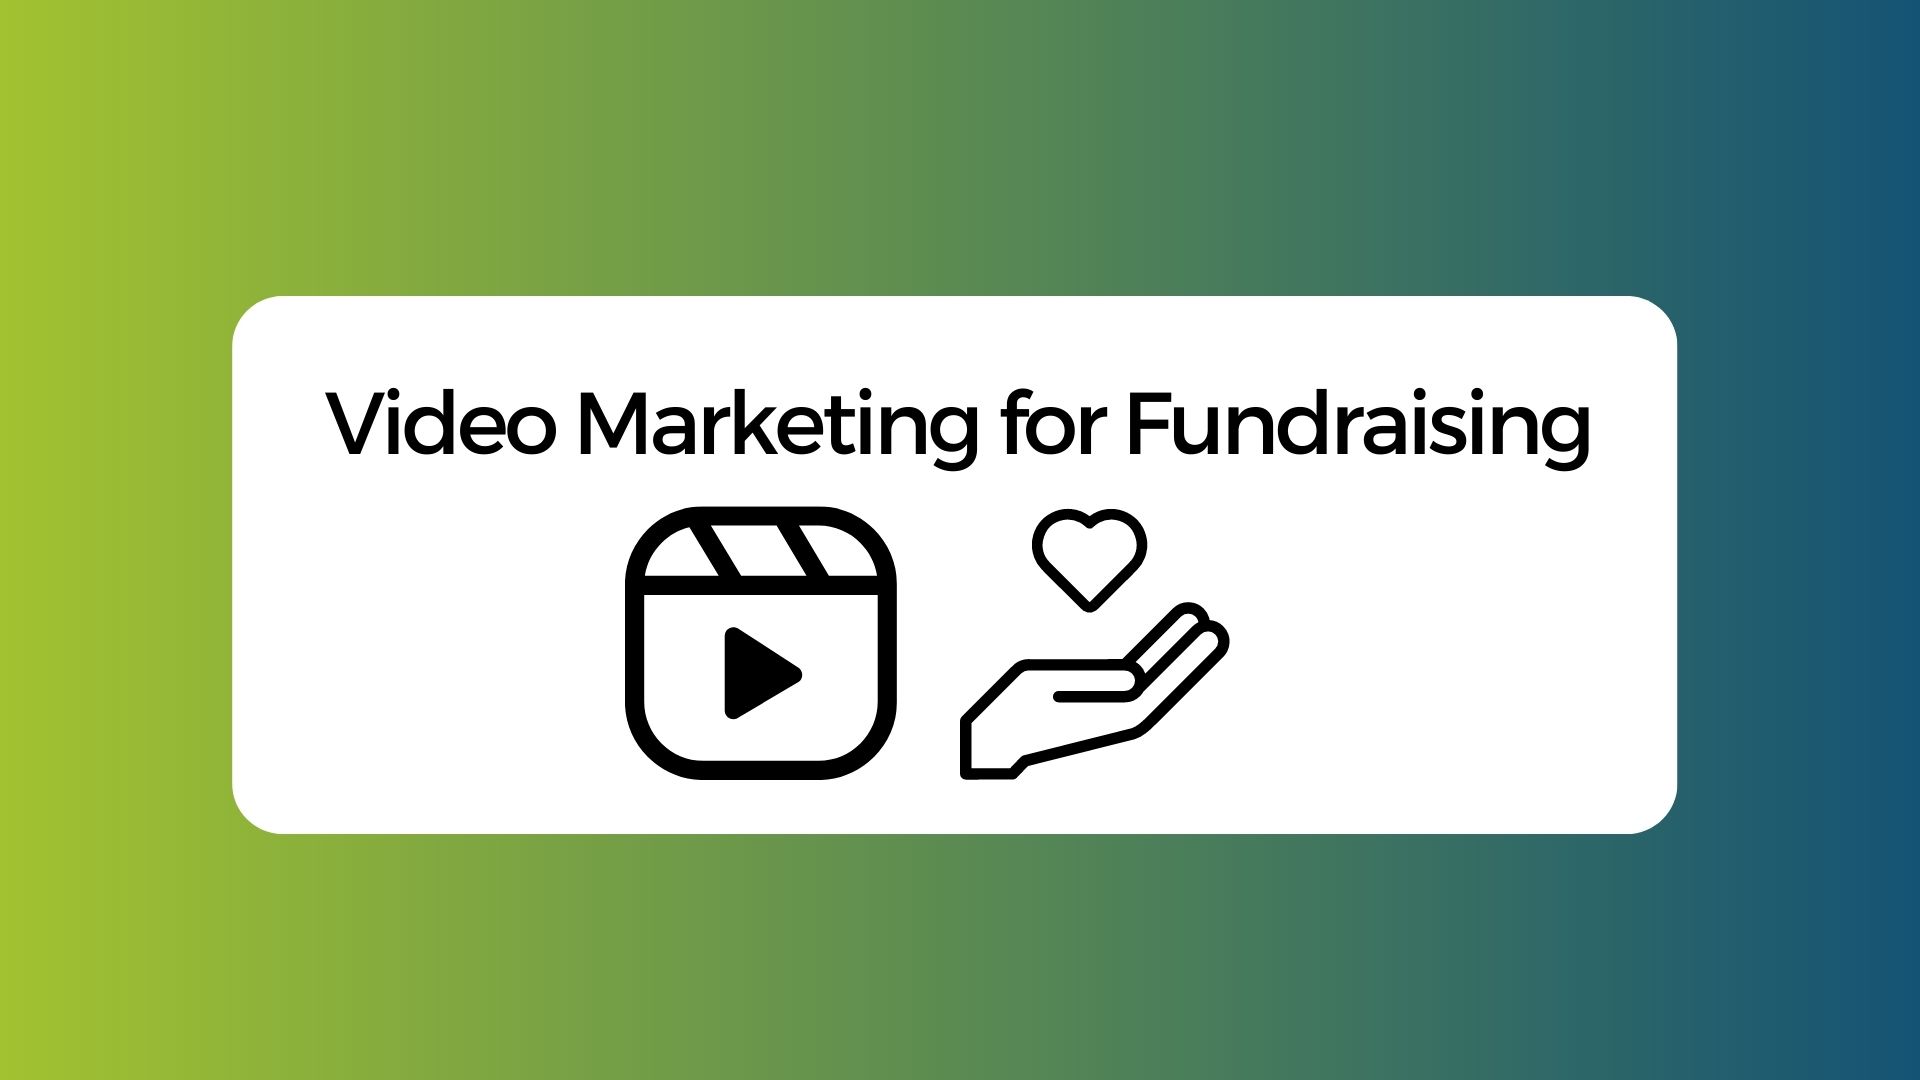 Video Marketing for Fundraising